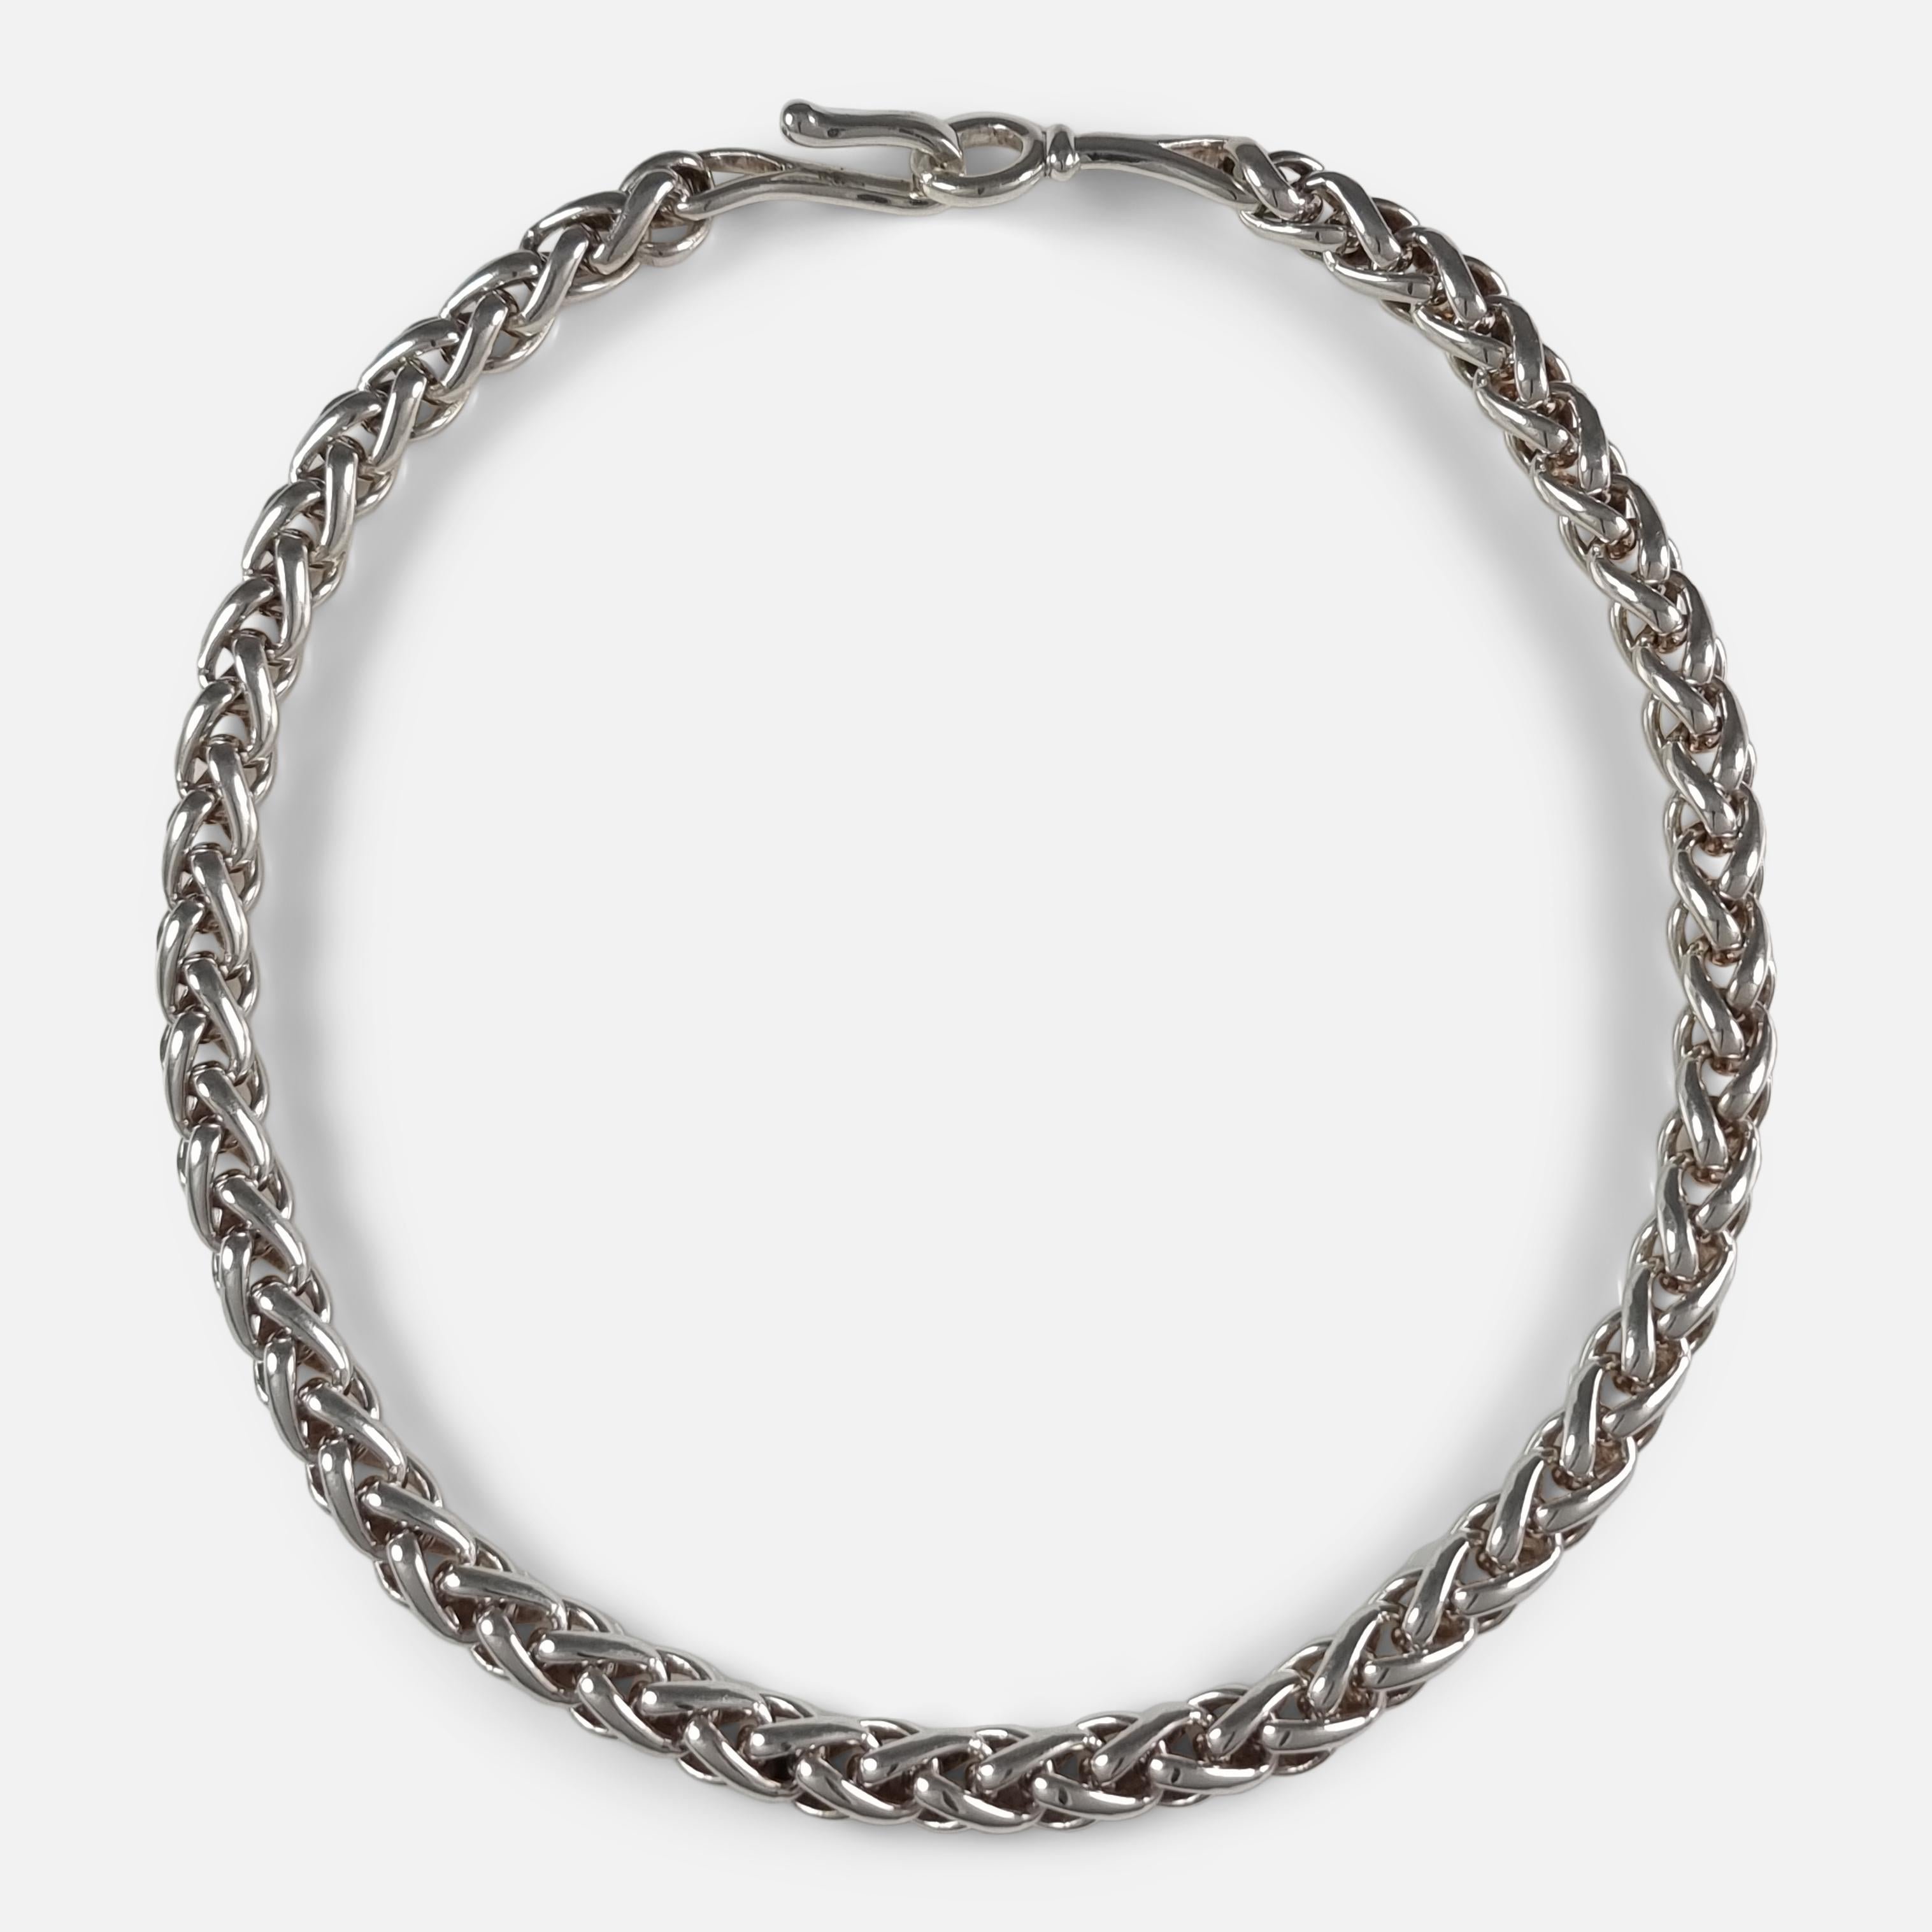 A Danish sterling silver necklace #294, designed by Vivianna Torun Bülow-Hübe for Georg Jensen. 

The necklace is stamped with the Georg Jensen within a dotted oval marking (used since 1945), '925 S', 'Torun', and design number '294'.  The necklace